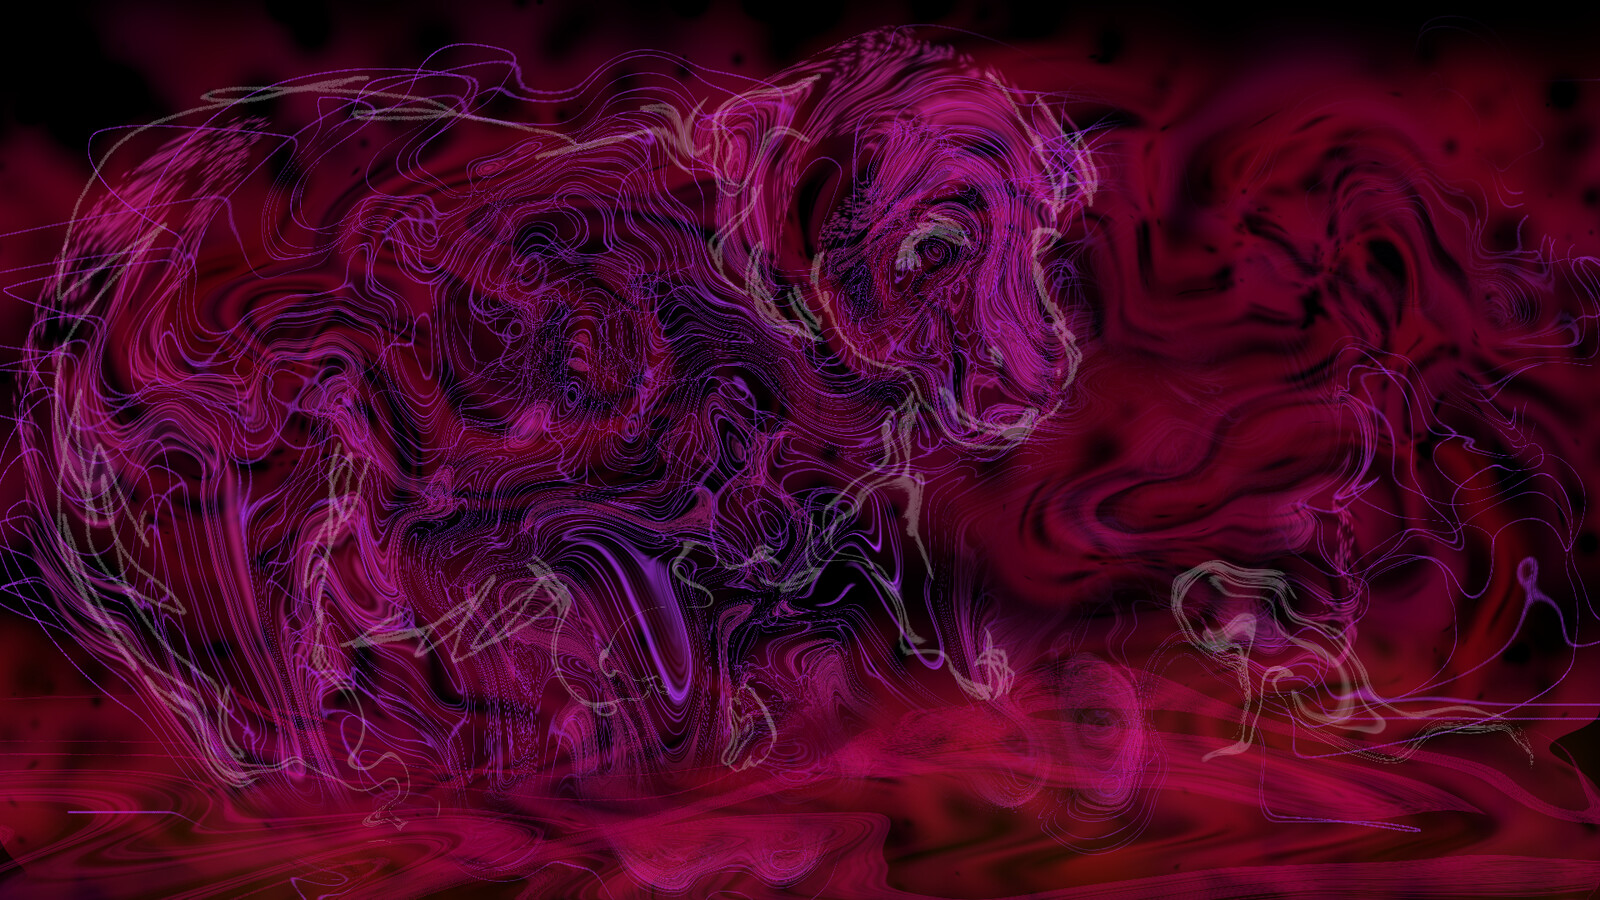 Noise Painting Archive #2